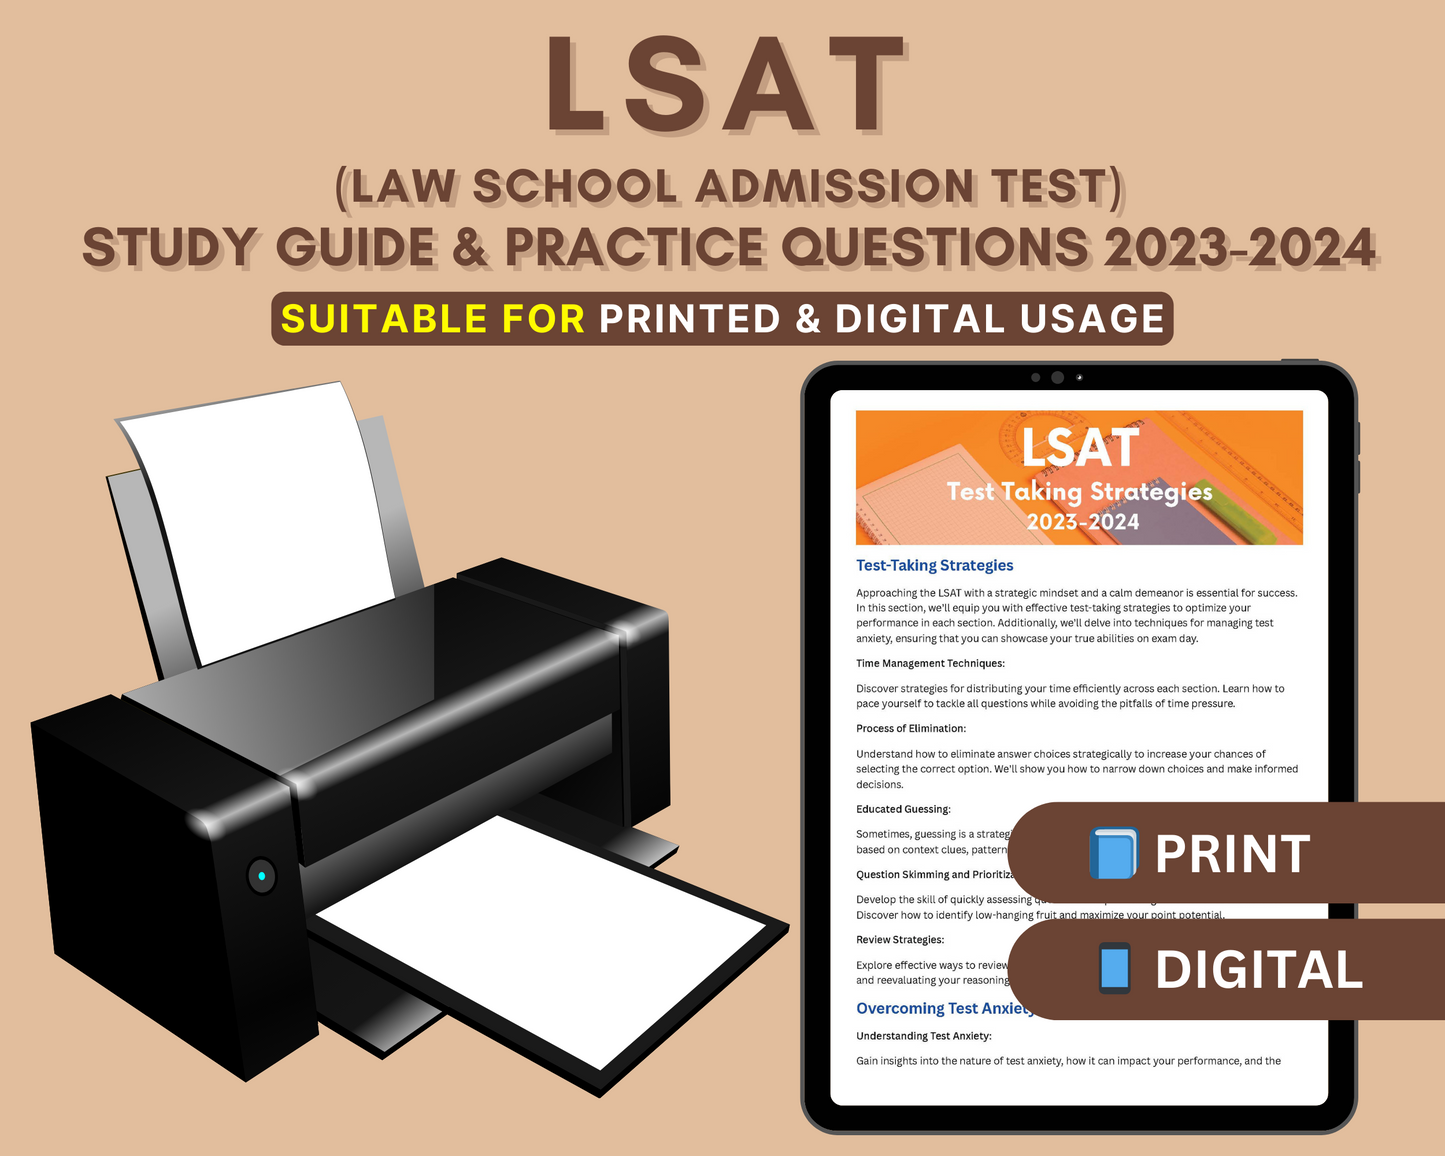 LSAT Prep Book 2023-2024: In-Depth Content Review, Practice Tests & Exam Strategies for Law School Admission Test